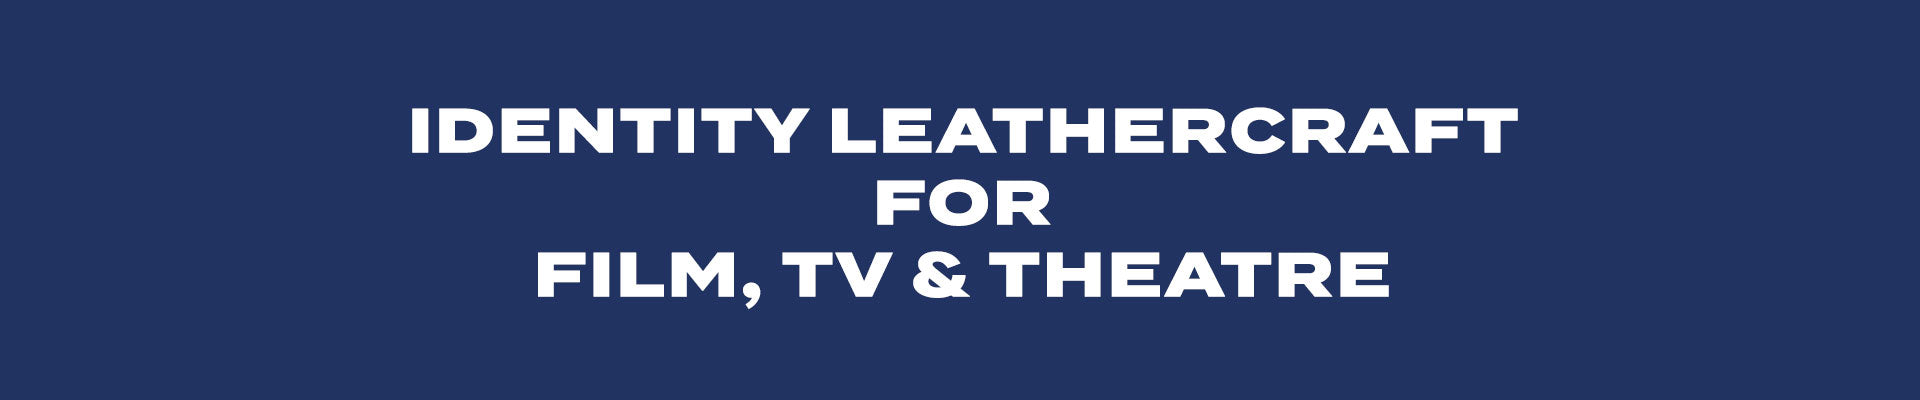 Identity Leathercraft for Film, TV and Theatre